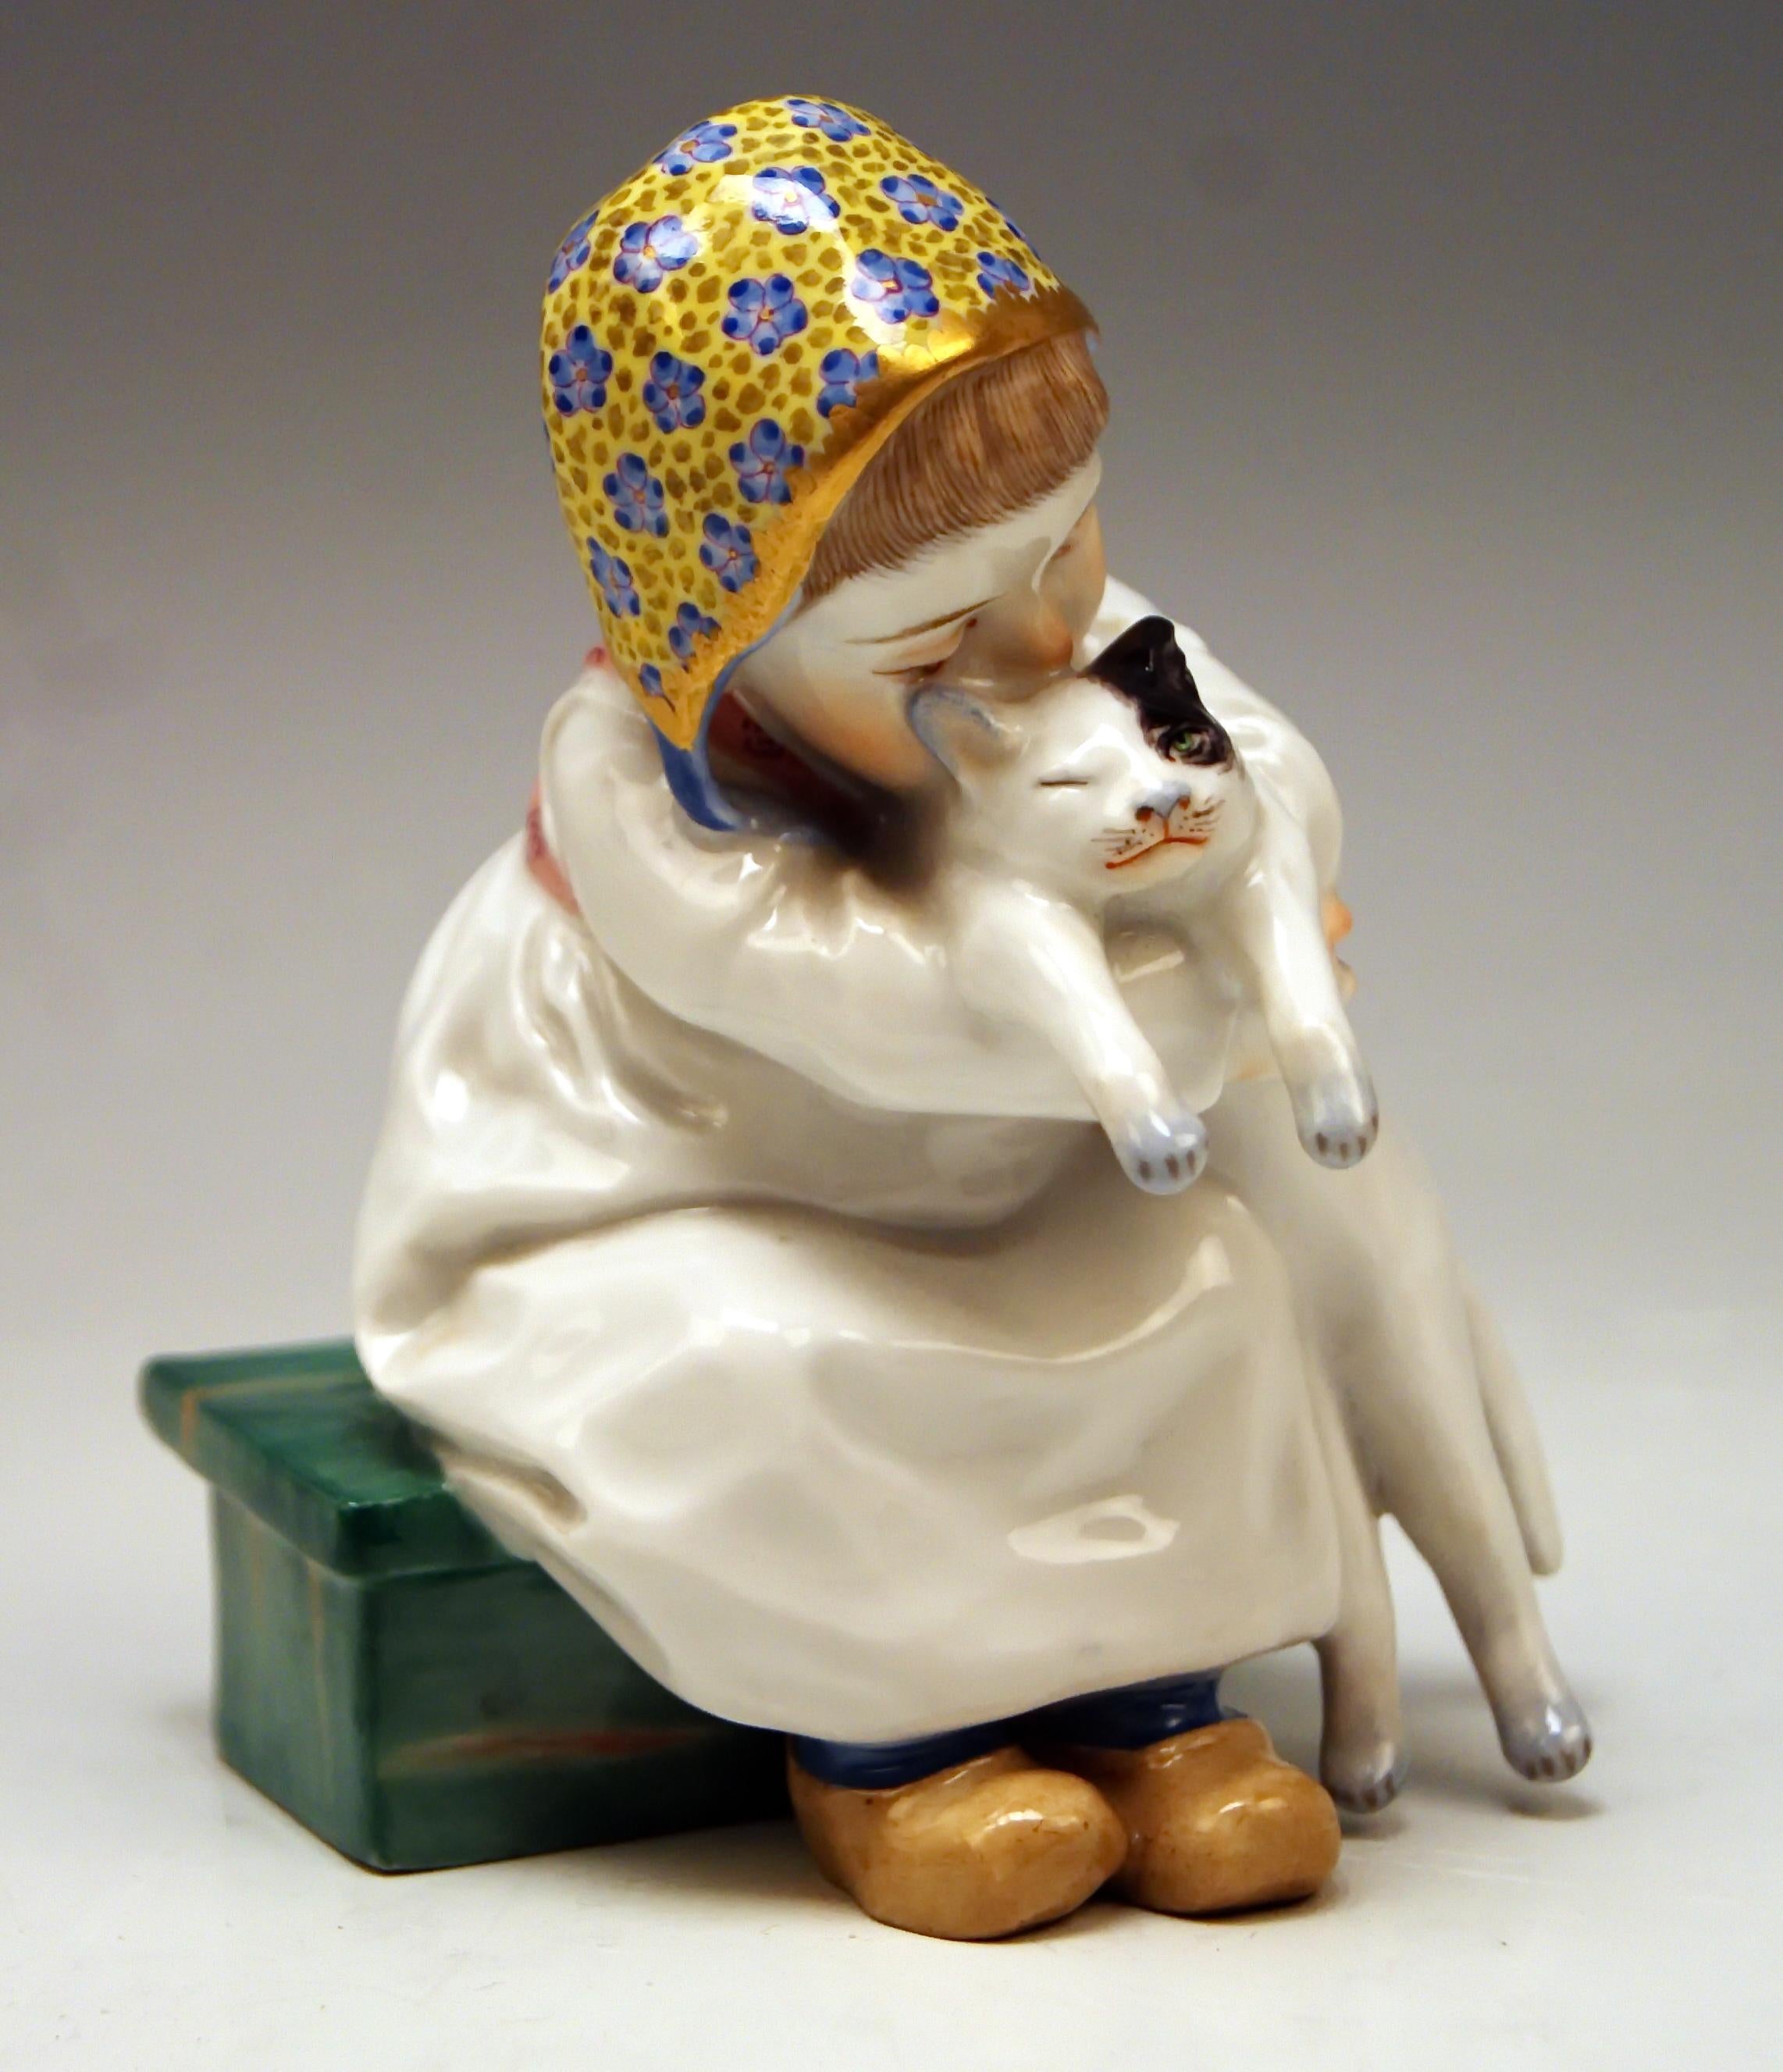 Meissen lovely Hentschel figurine: Girl holding a cat in her arms
Model W 121

Measures:
Height: 4.72 inches (= 12.0 cm)
Depth: 3.74 inches (= 9.5 cm)
Width: 3.74 inches (= 9.5 cm)

Manufactory: Meissen
Hallmarked: Blue Meissen Sword Mark